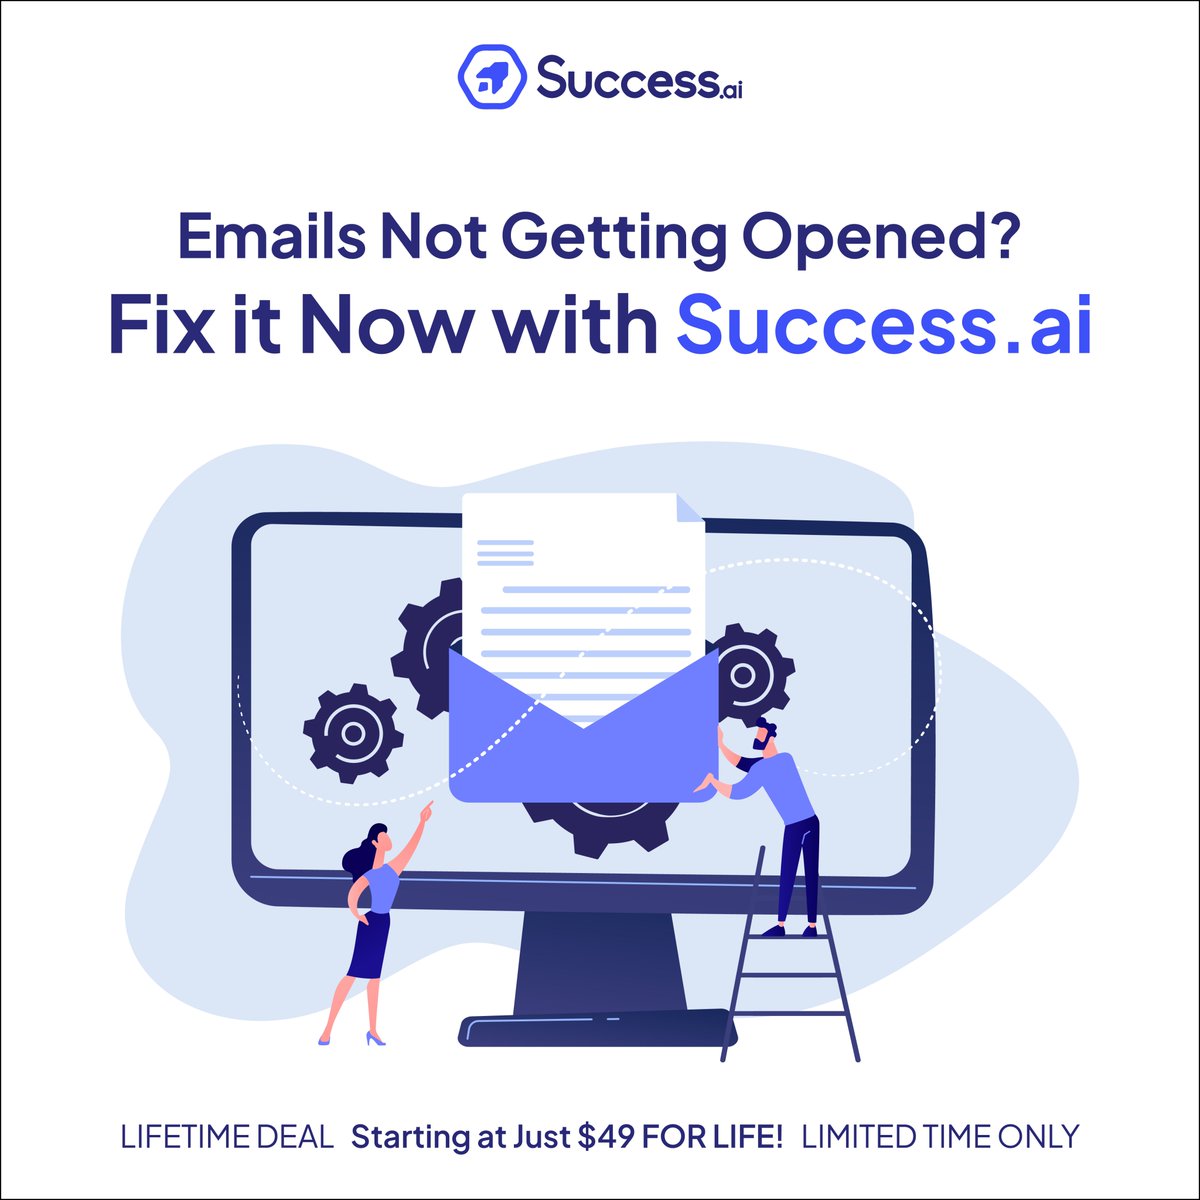 Are you experiencing low email open and engagement rates? What if you could utilize AI to create tailored emails that are actually opened and clicked?
appsumo.com/products/succe…
#EmailAutomation #EmailAccounts #SuccessAi  #EmailStrategy #B2BLeadGen #emailmarketing #leadgeneration